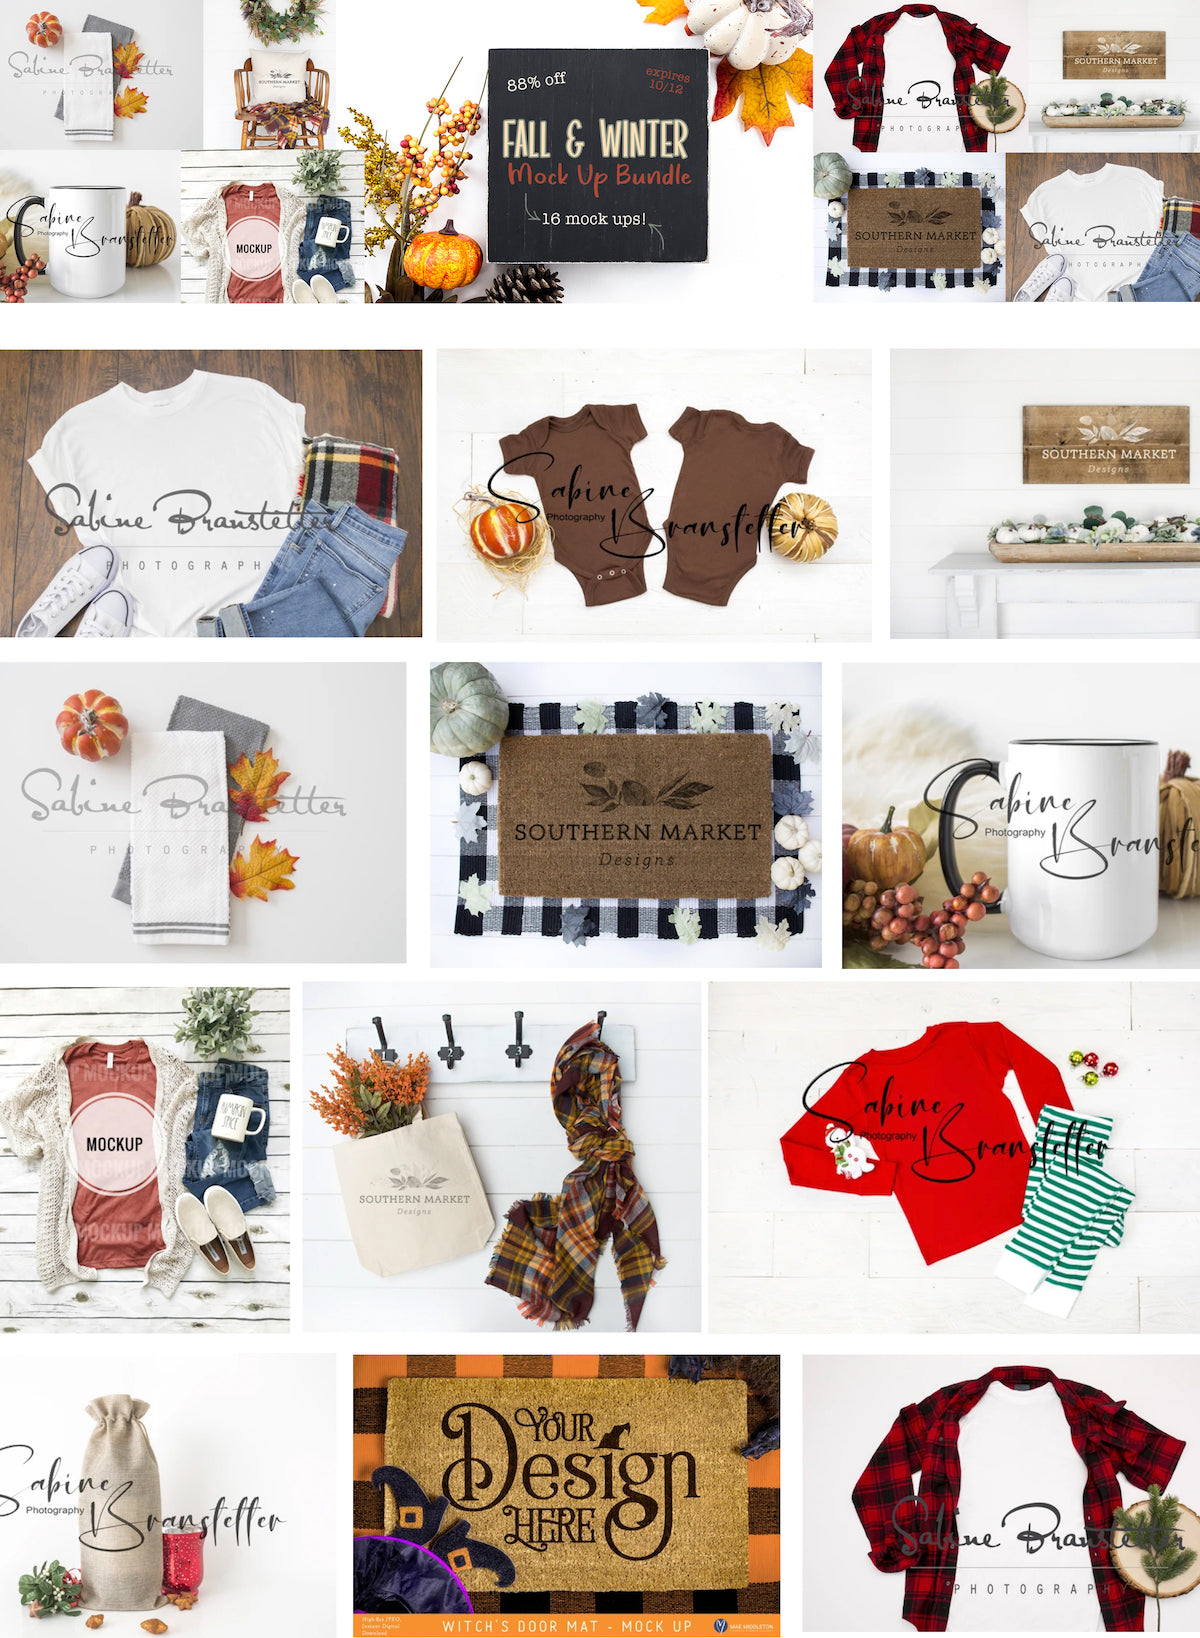 Fall & Winter Mock Up Bundle from So Fontsy